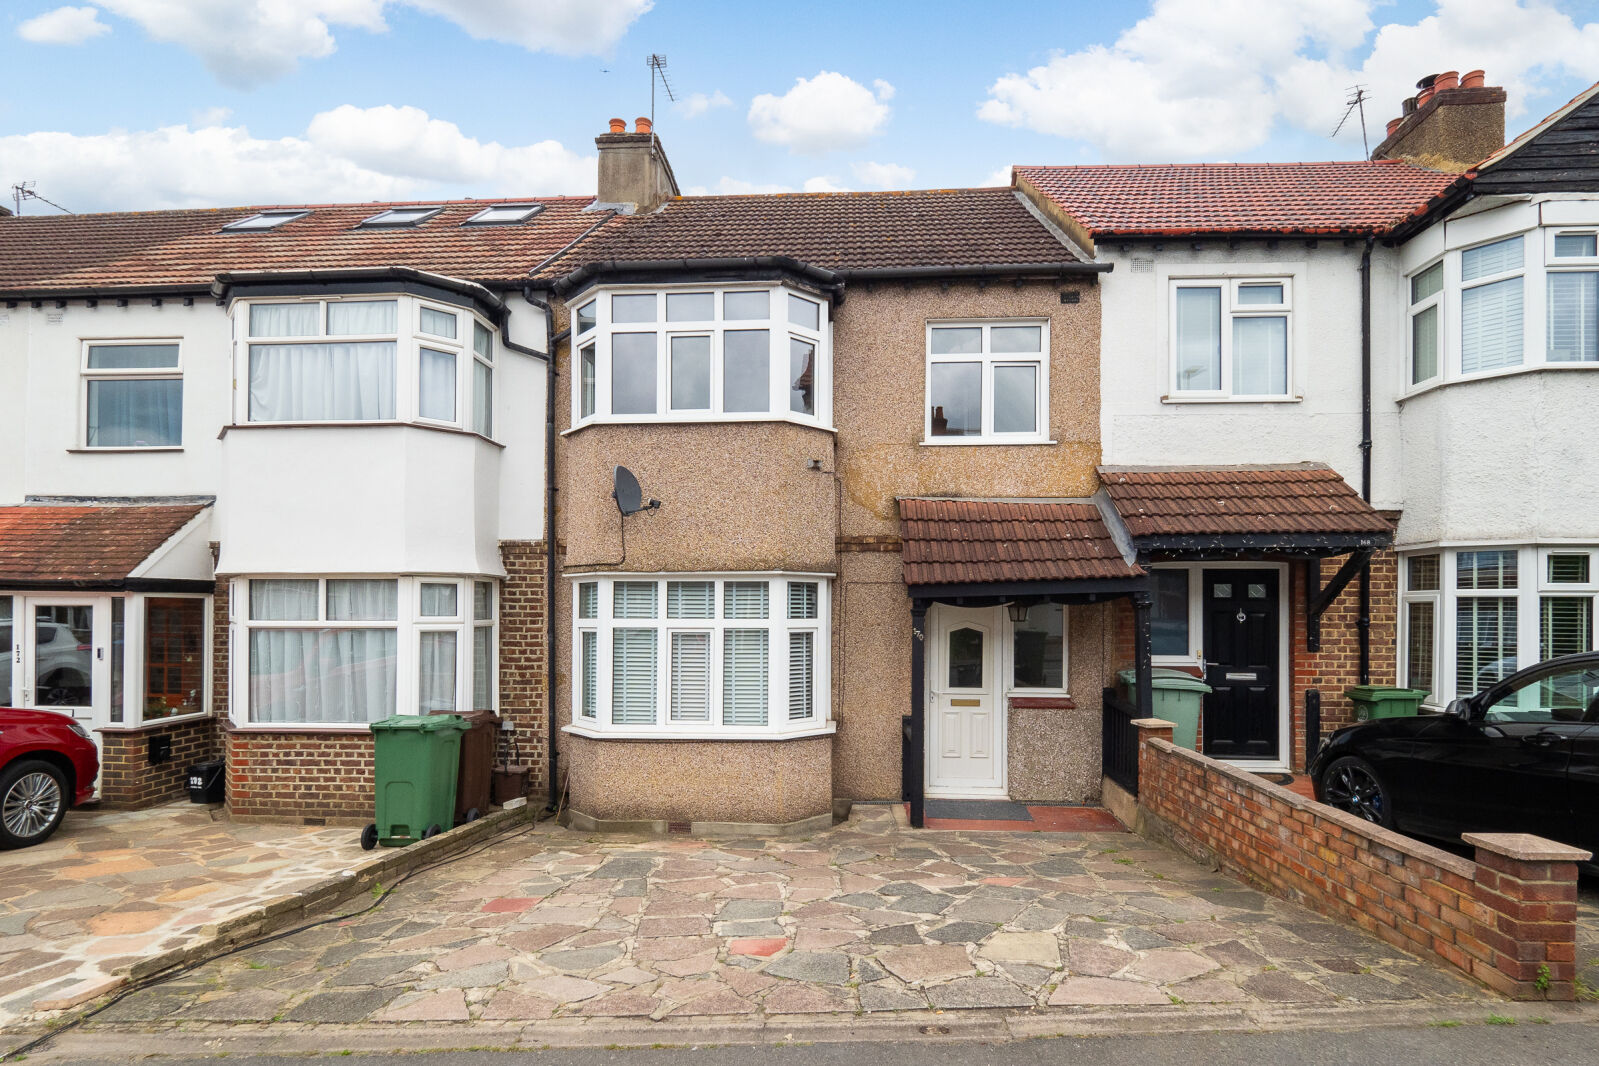 3 bedroom mid terraced house for sale Malden Road, Cheam, SM3, main image